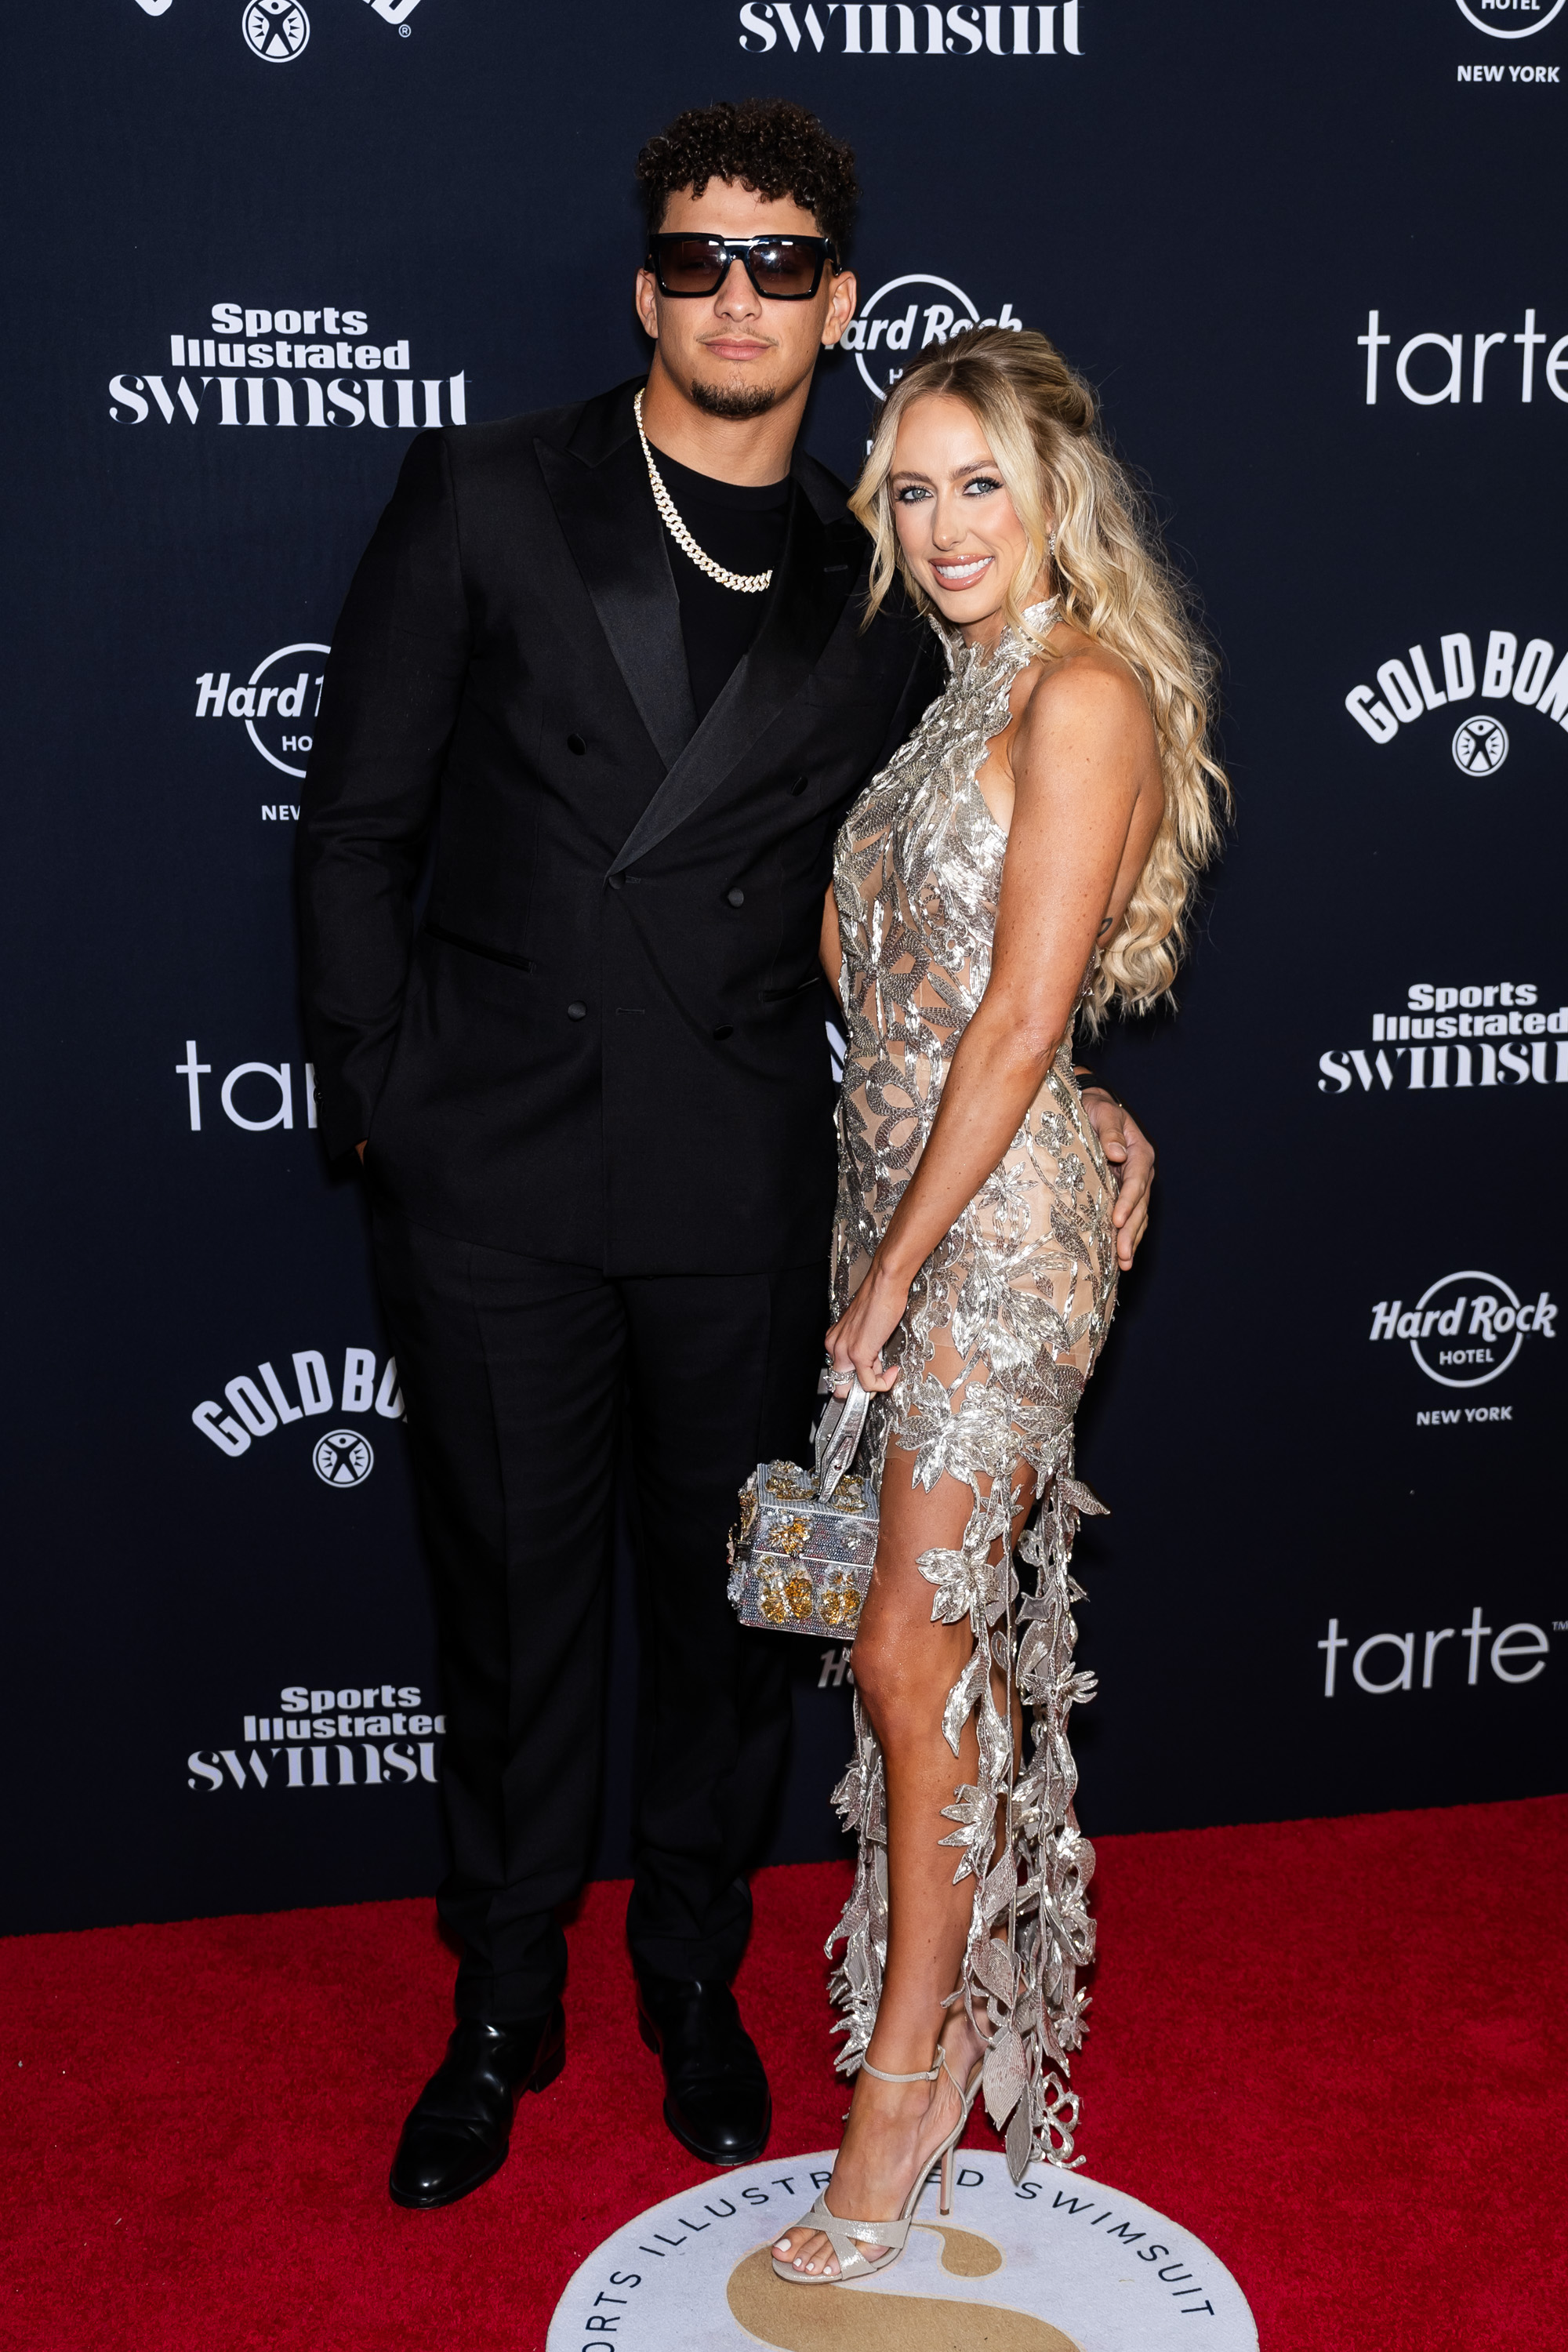 Patrick and Brittany Mahomes have massive followings online